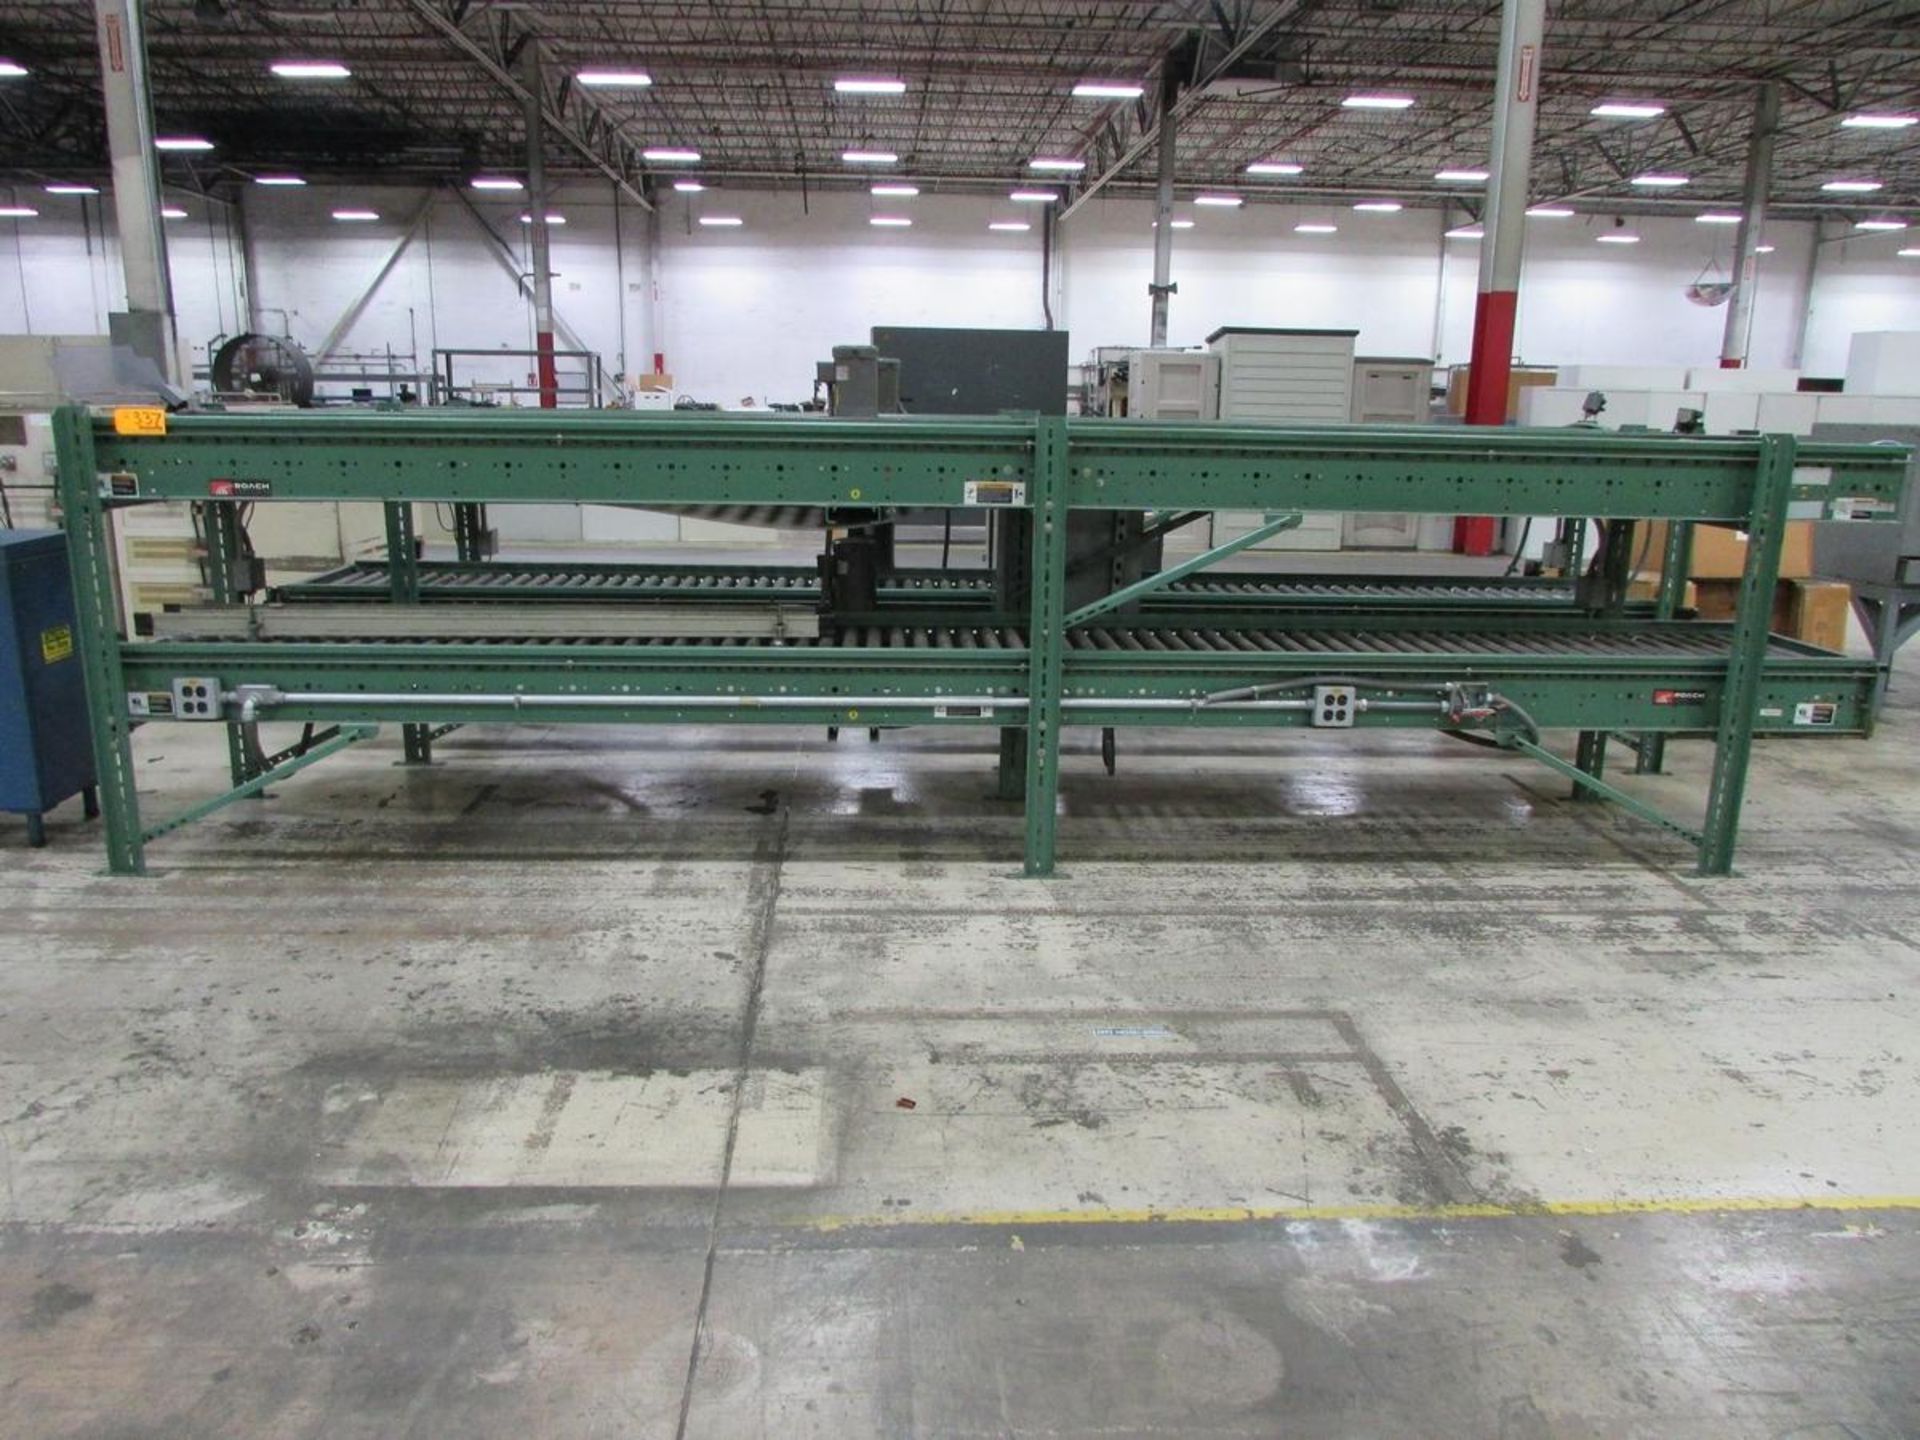 Roach Conveyors (2) 17'x2' Double Deck Powered Roller Conveyor Sections - Image 4 of 6